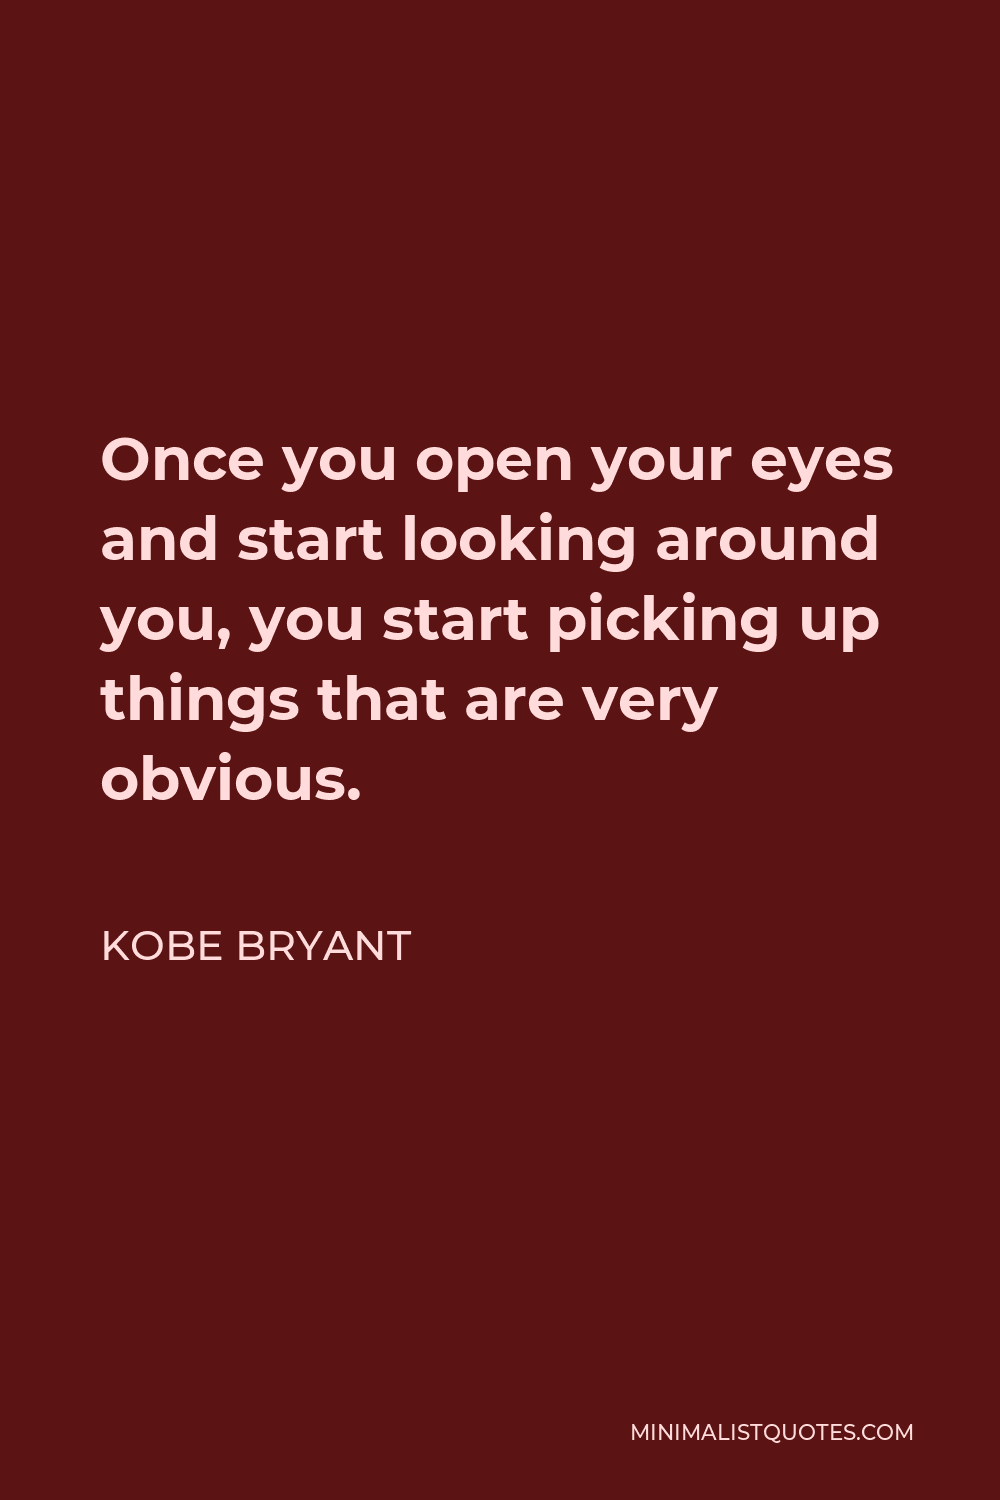 Kobe Bryant Quote - Once you open your eyes and start looking around you, you start picking up things that are very obvious.